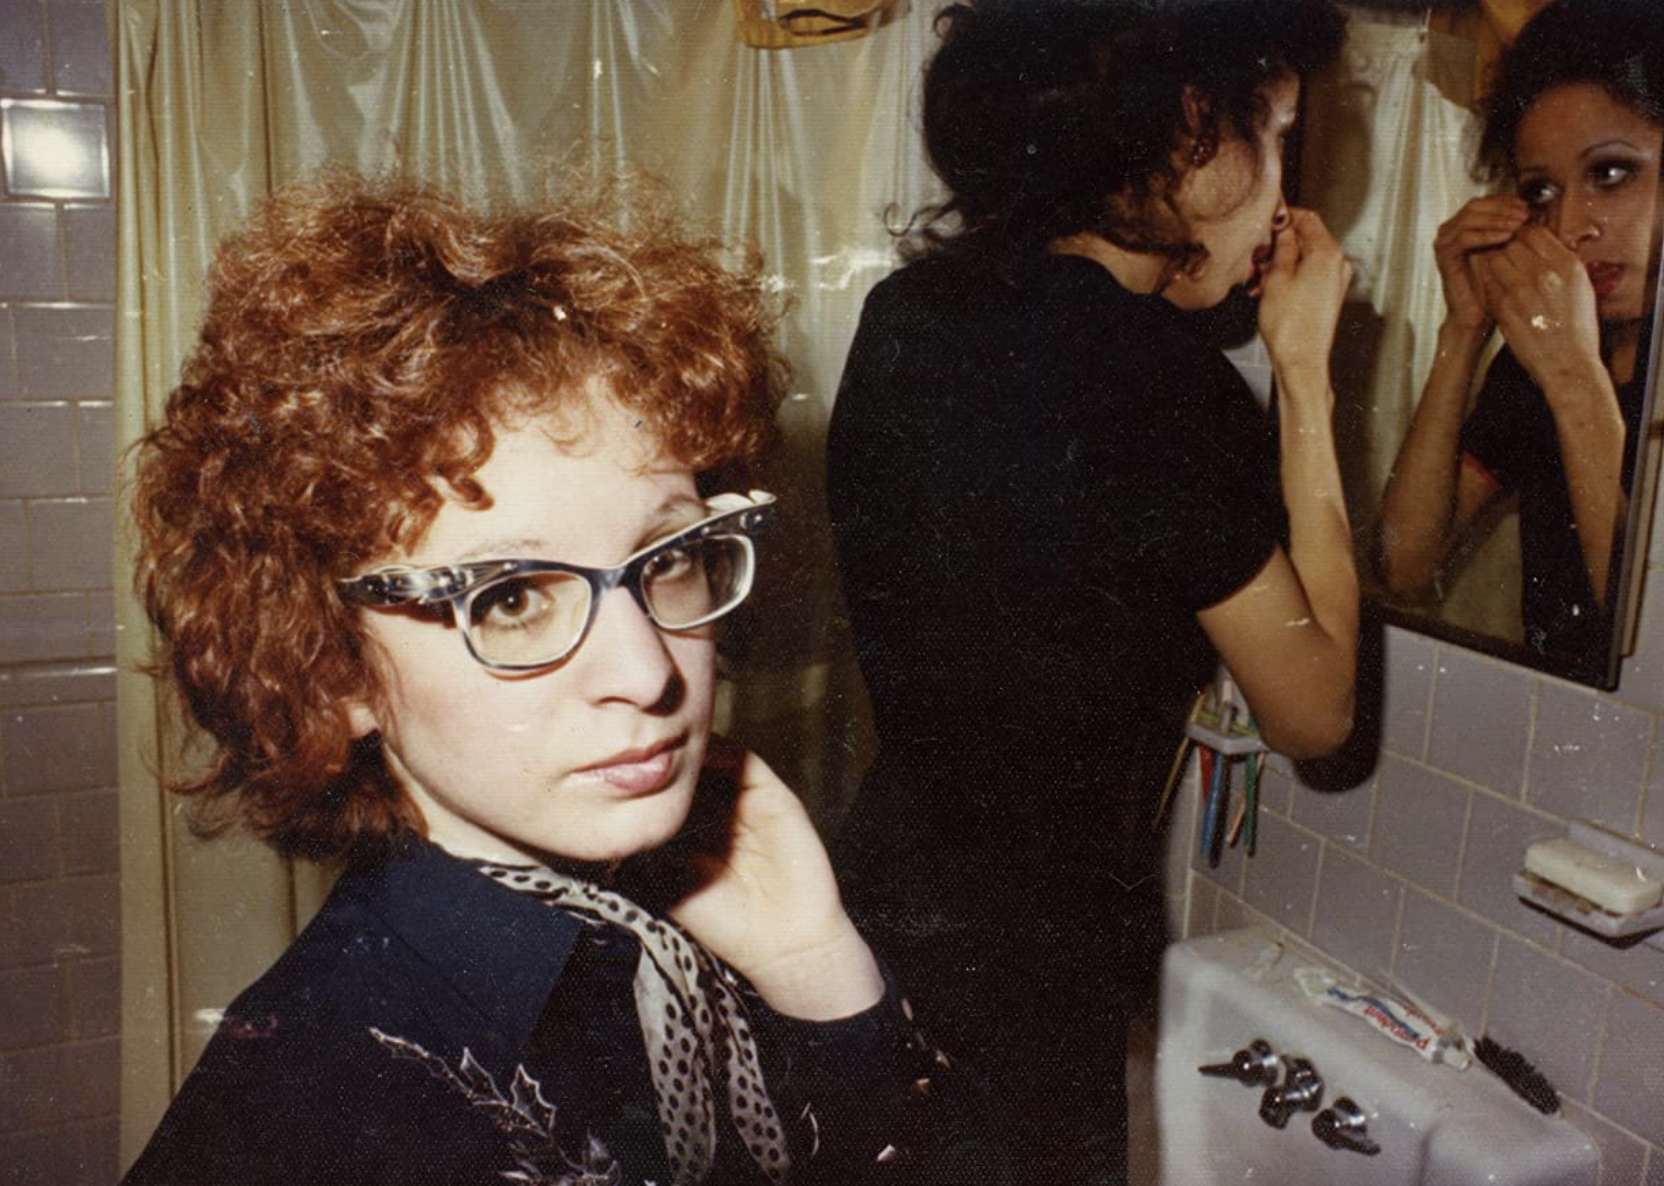 Nan Goldin in a scene from "All the Beauty and the Bloodshed."